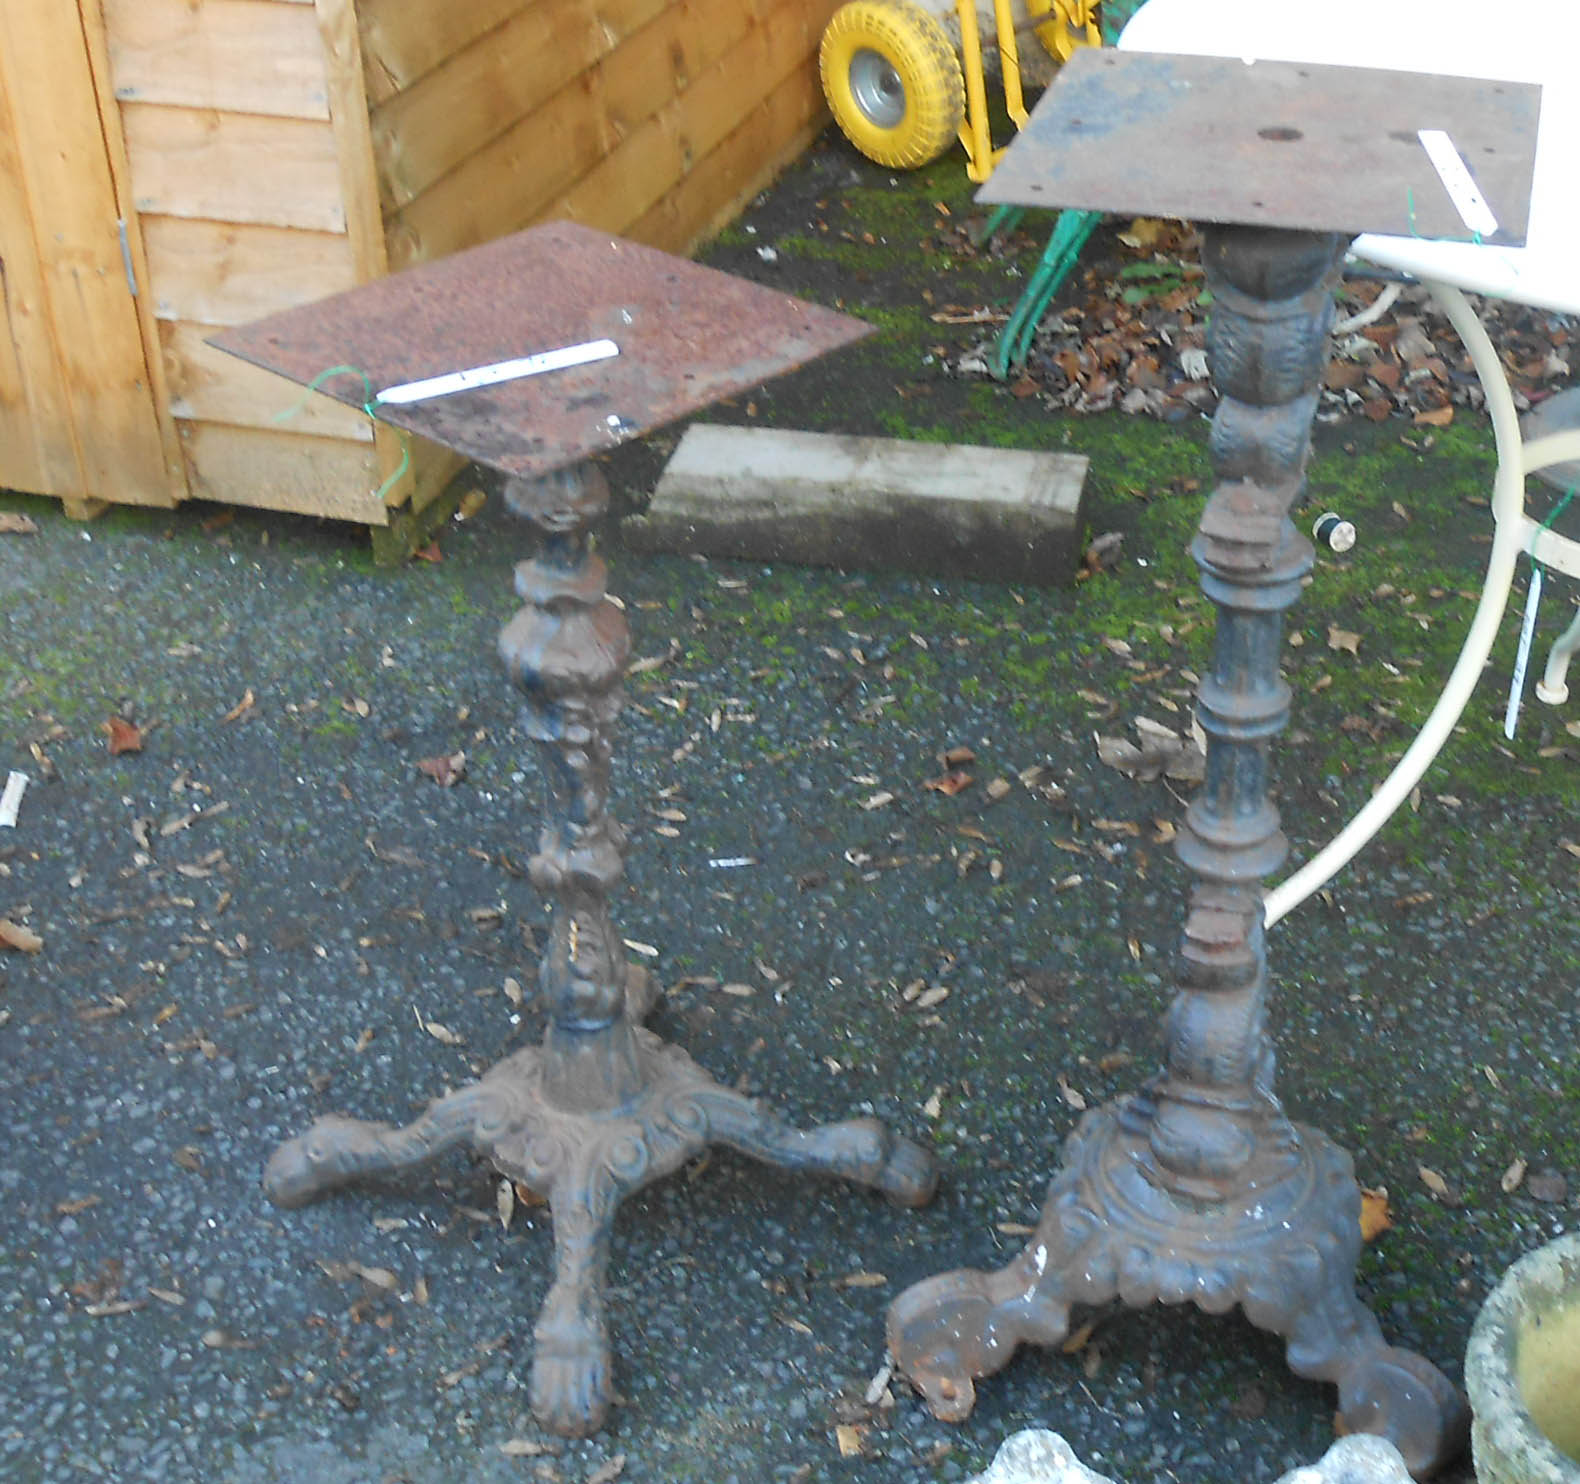 Two modern painted cast iron public house table pedestals with ornate decoration, one set on tripod,